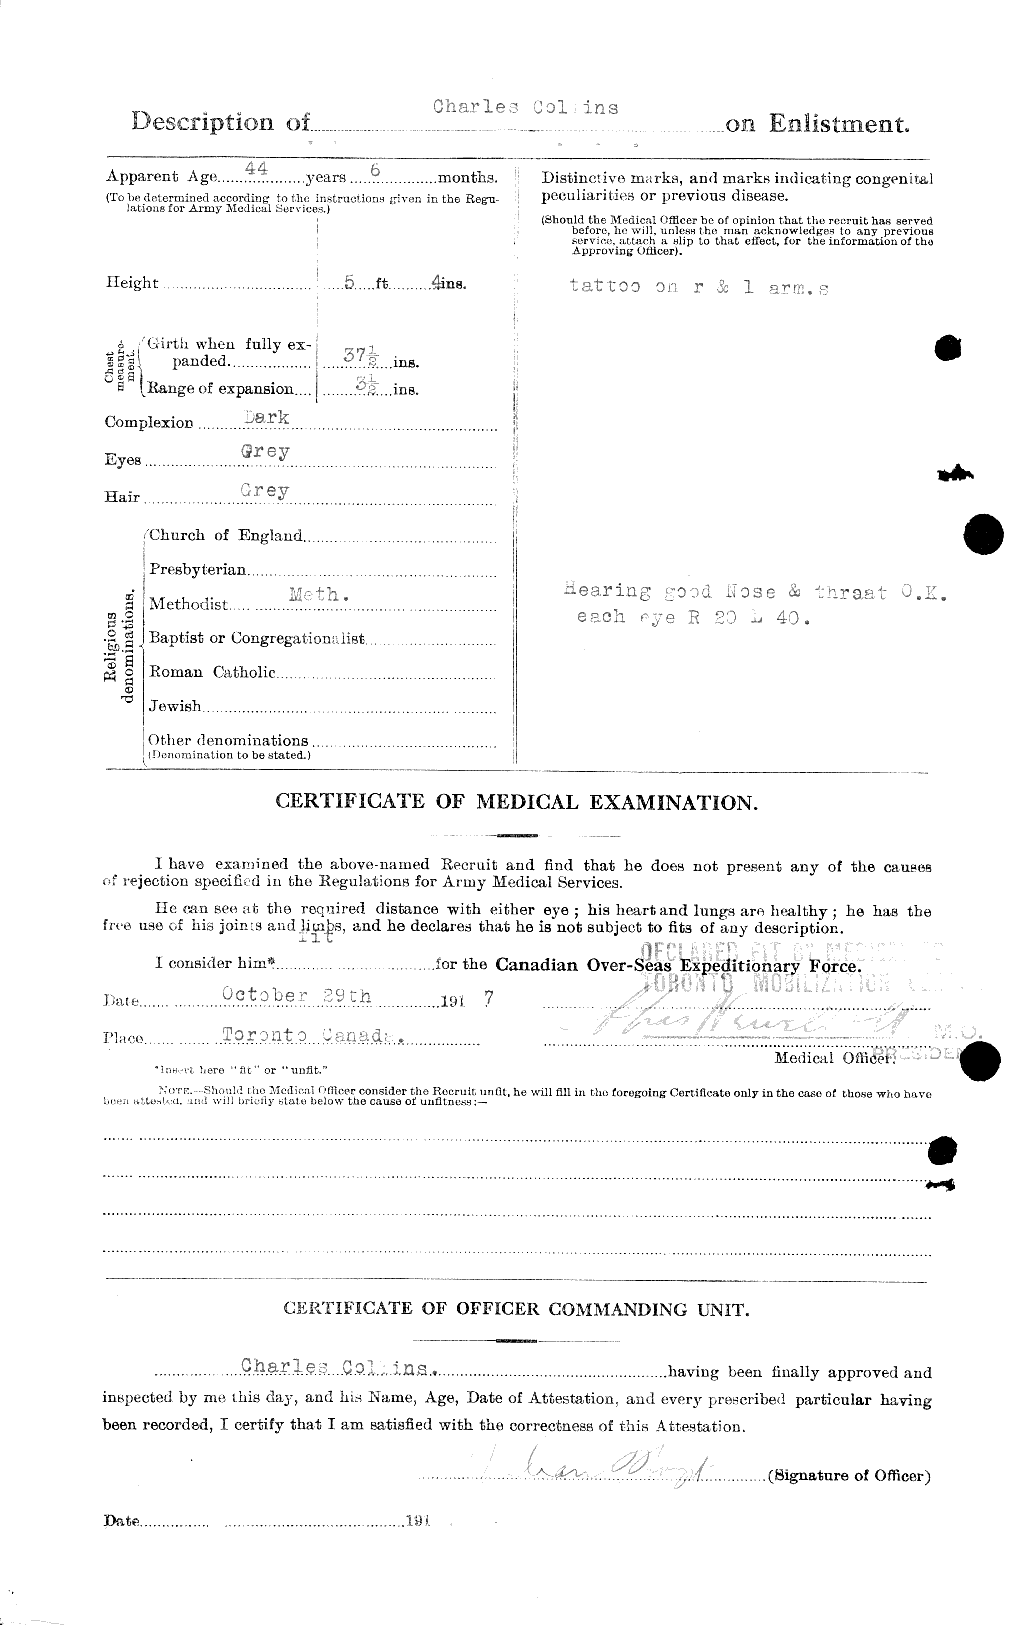 Personnel Records of the First World War - CEF 029020b